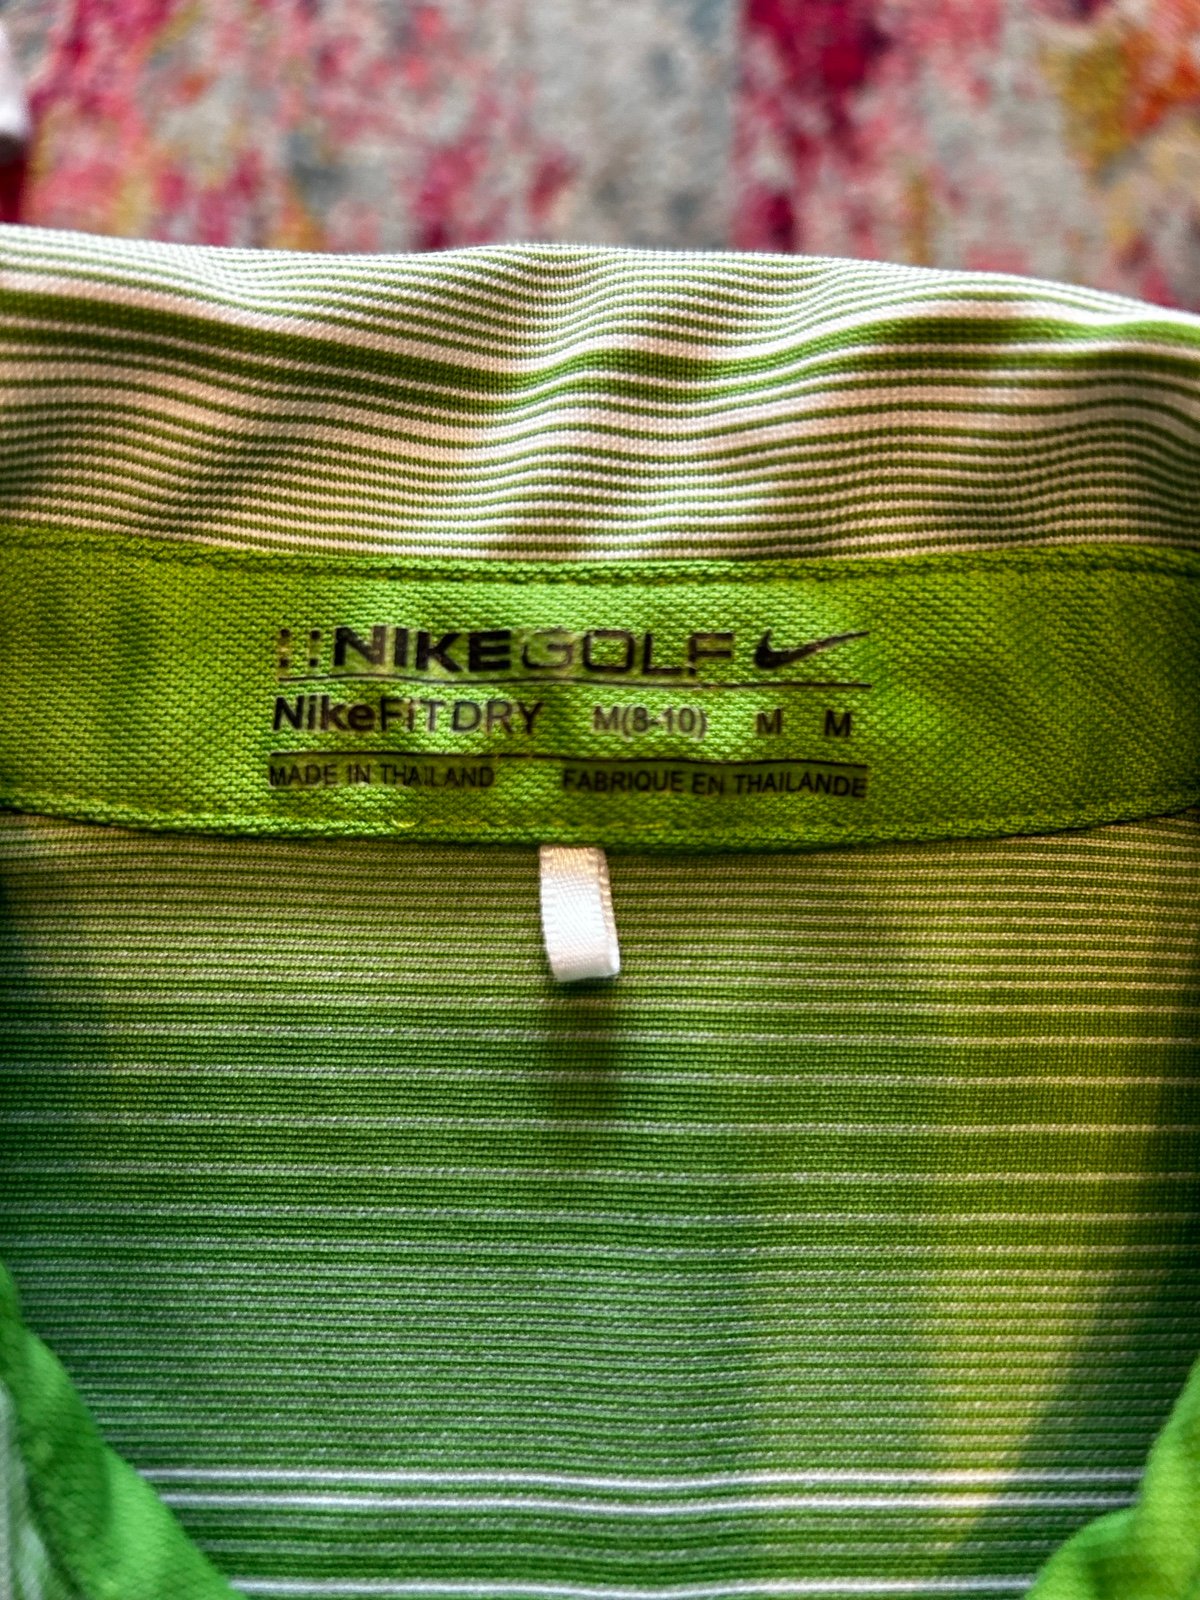 Latest  Women’s NikeGolf Fit Dry Polo lBQM06UMv just for you